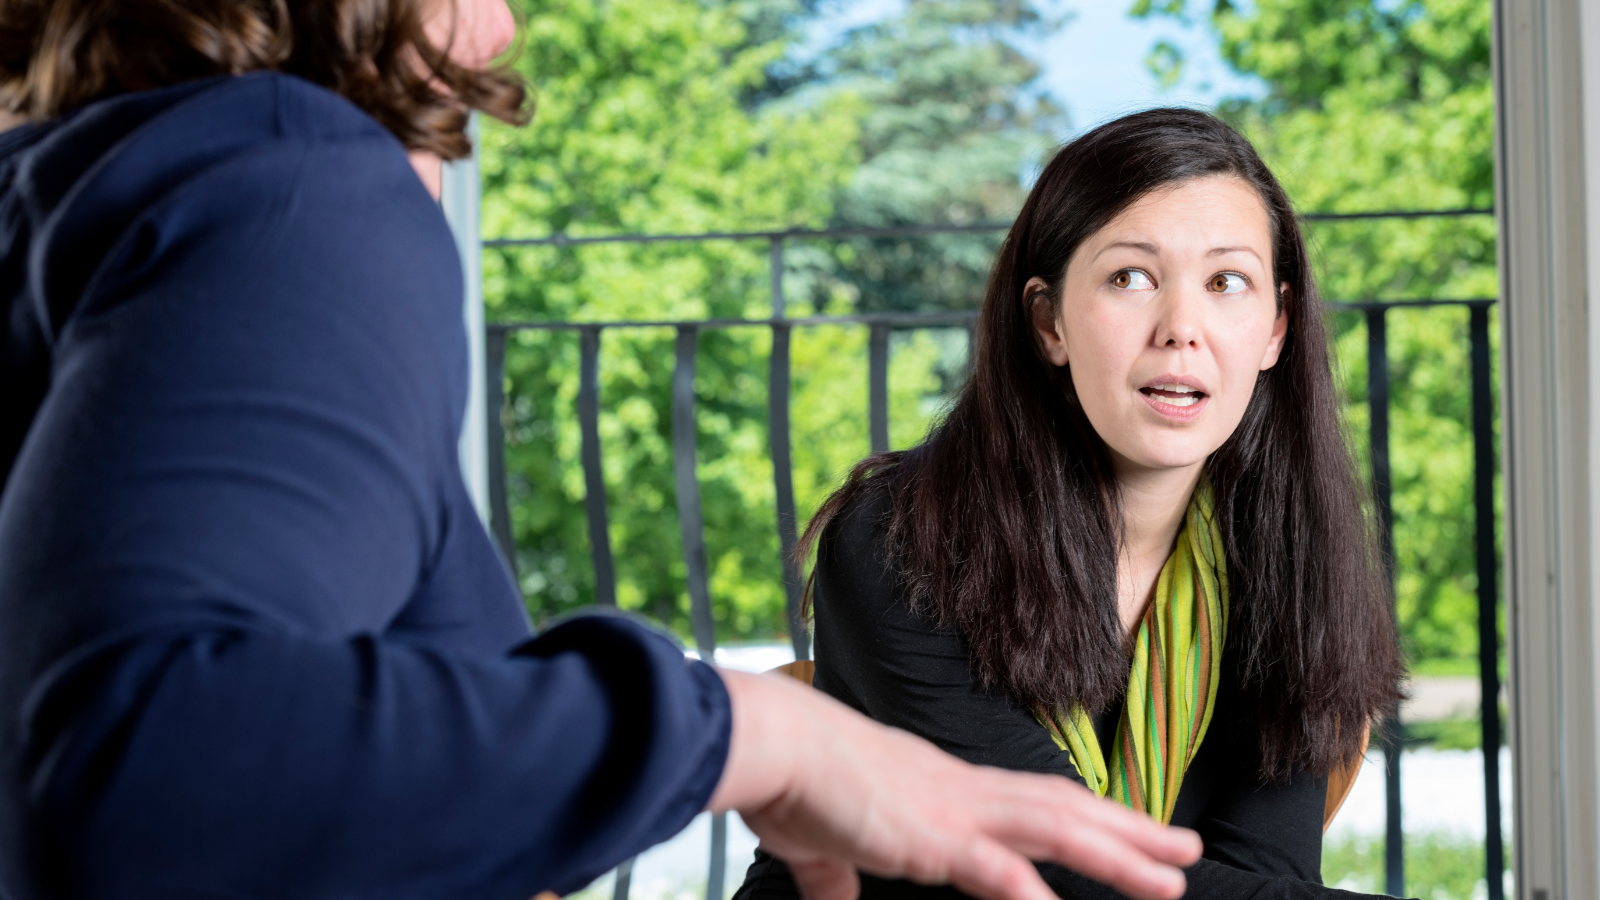 Difficult Professional Conversations: Tips to Help Control Emotions